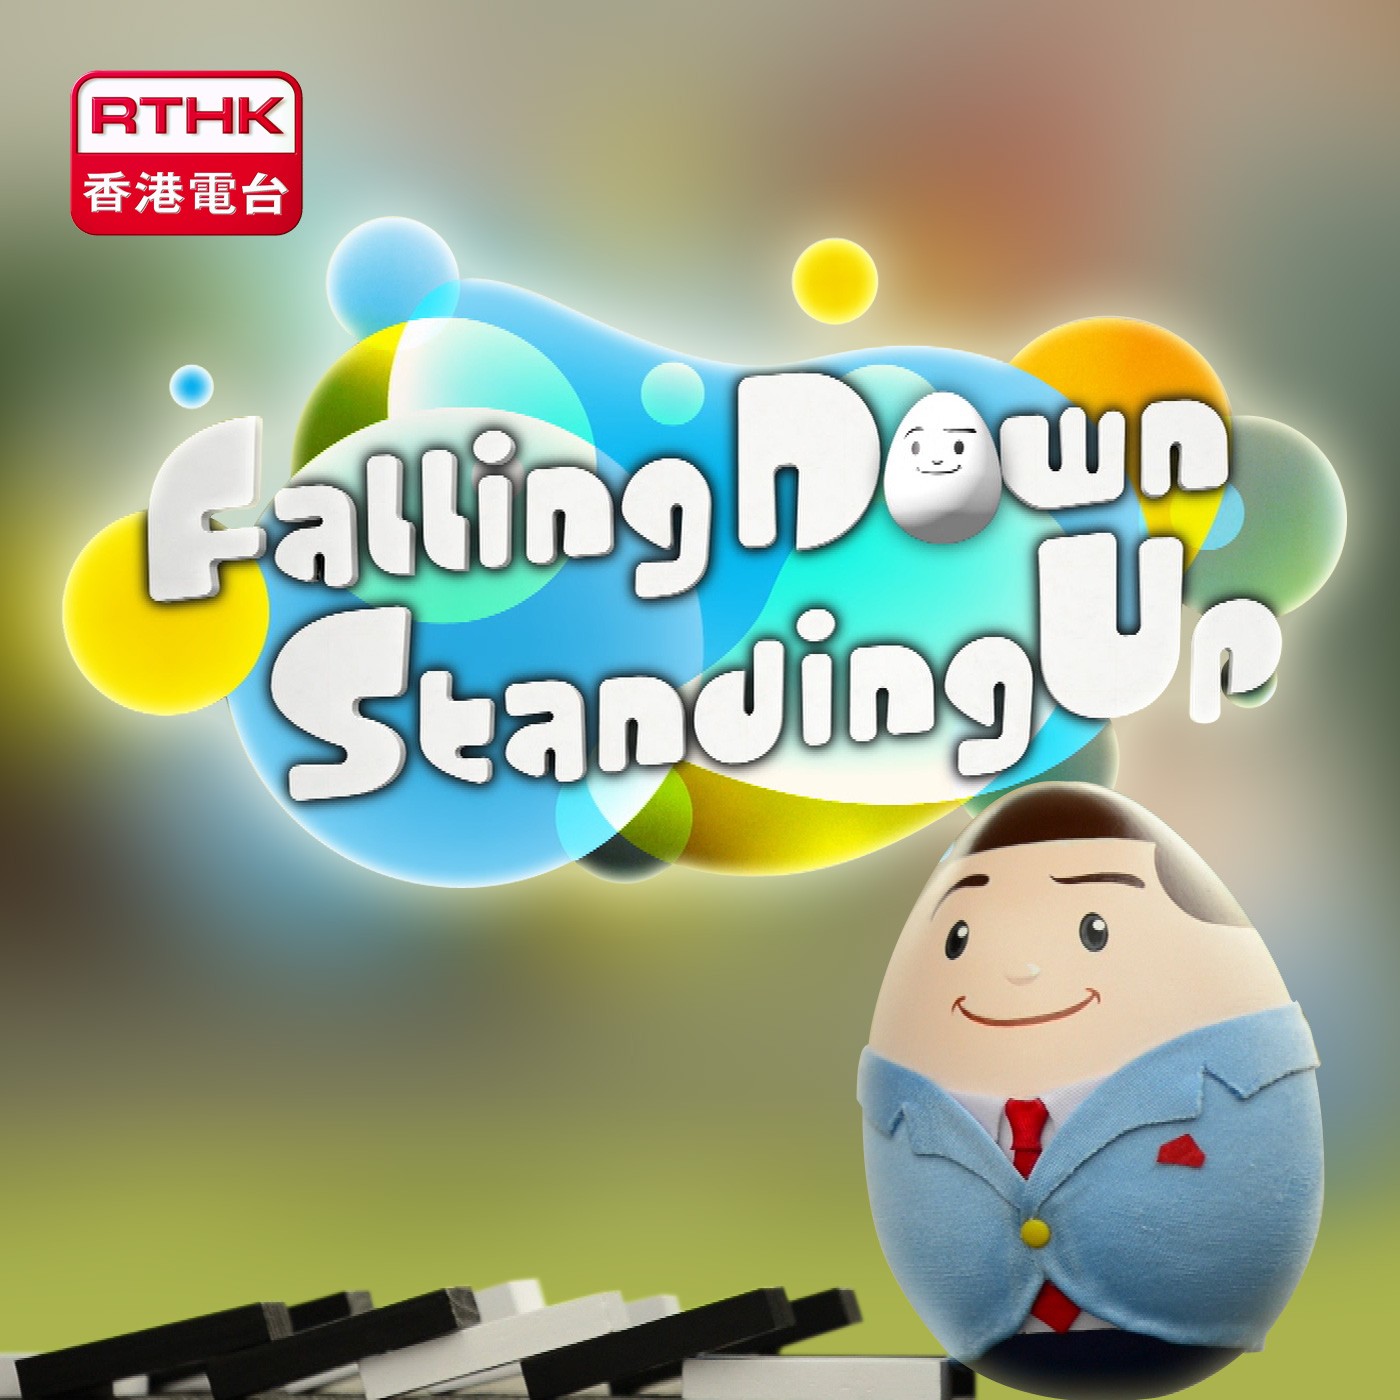 Falling Down, Standing Up